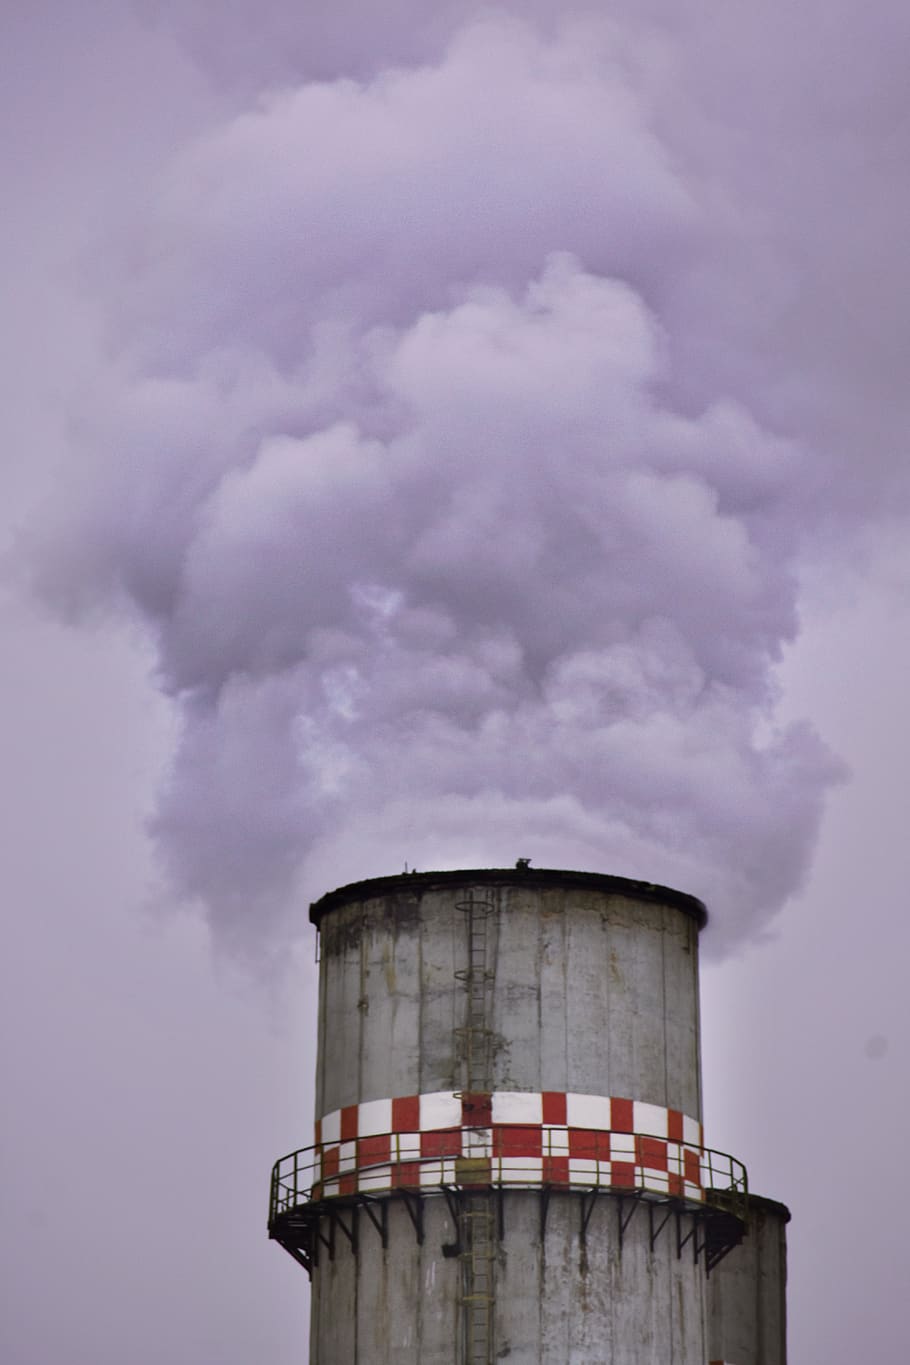 Factory Chimney Producing Smoke, air pollution, industrial plant, HD wallpaper